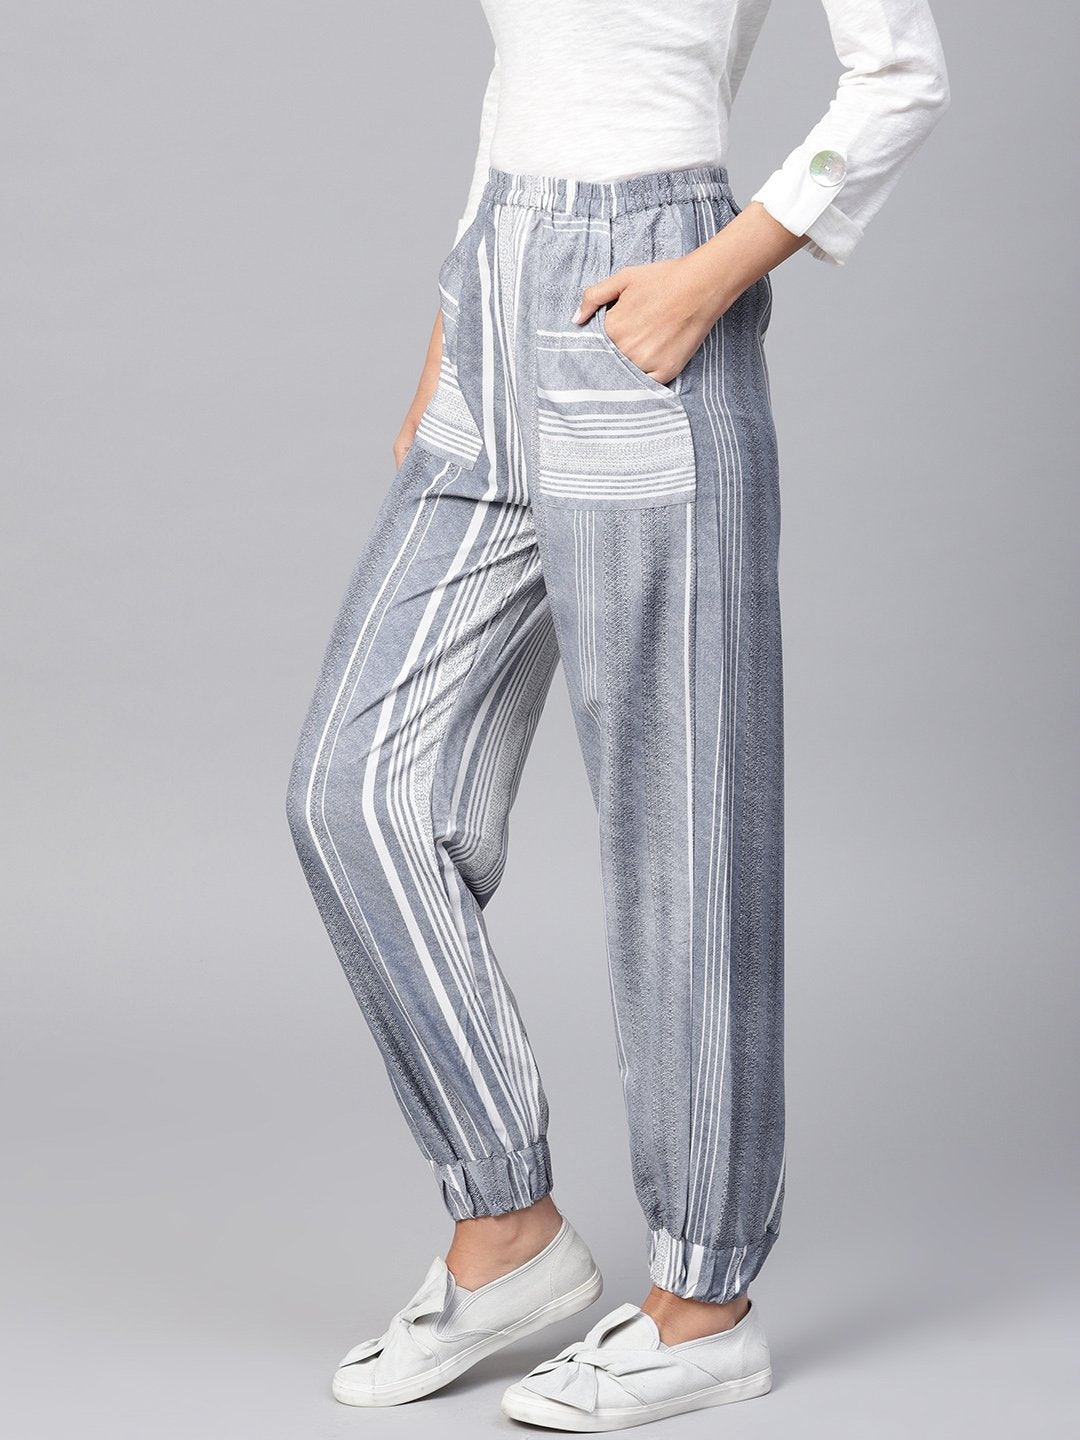 Women's Grey Striped Ankle Length Jogger With Elastic Band - Nayo Clothing